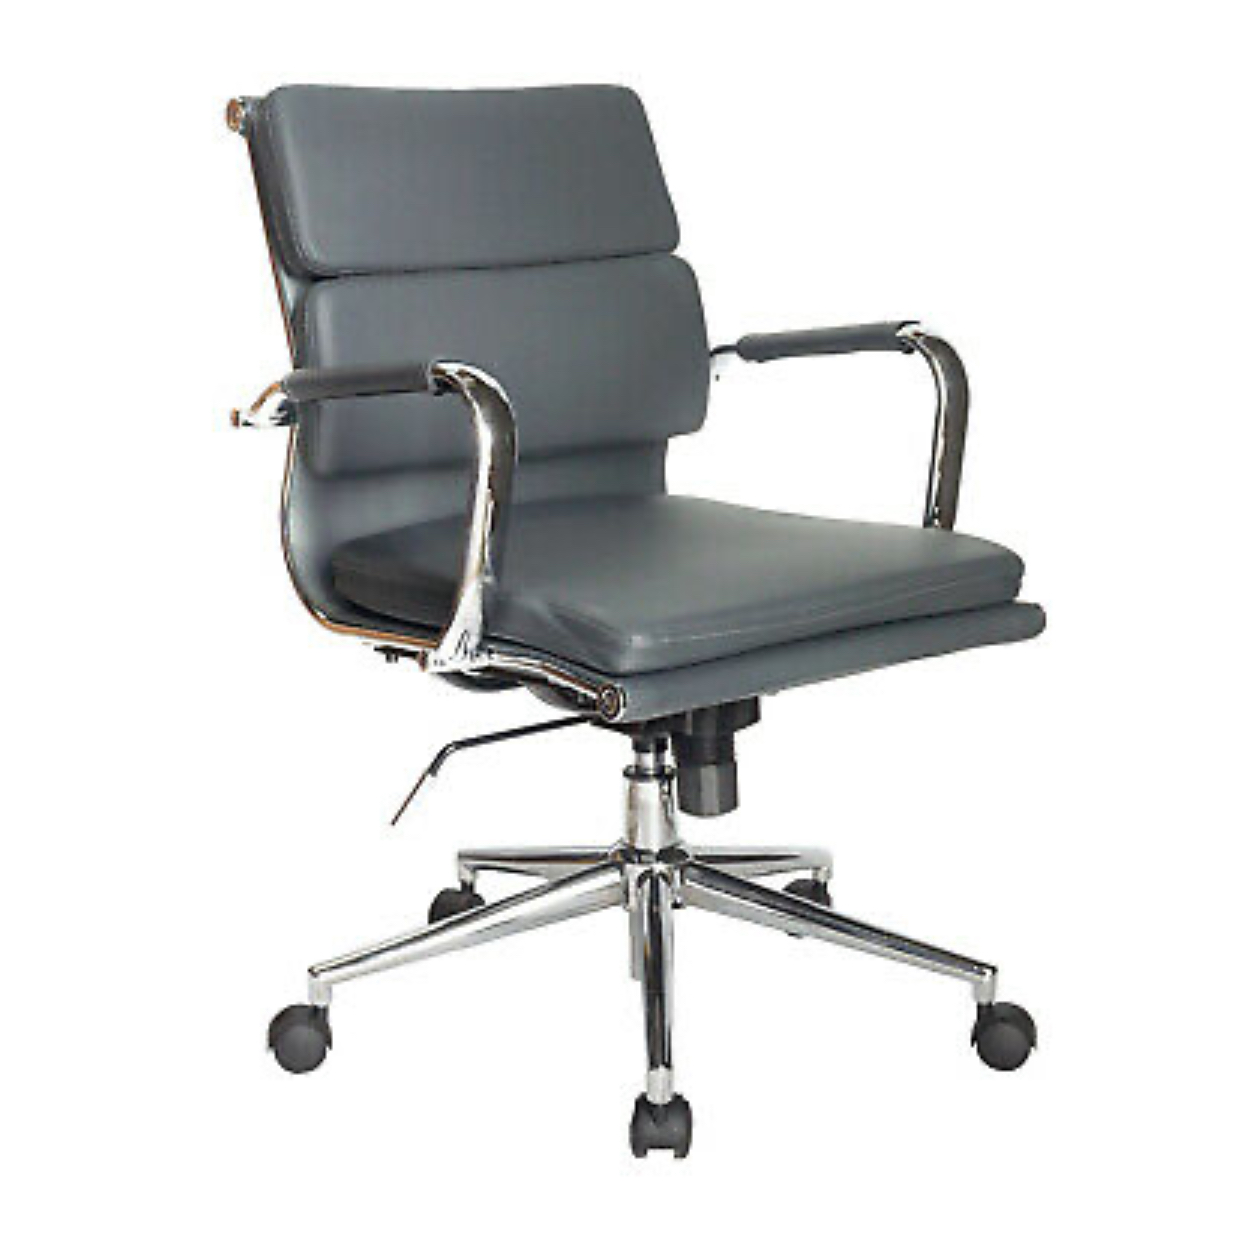 Budget Eames Style Soft Pad Designer Grey Bonded Leather Executive Office Chair | Furniture and